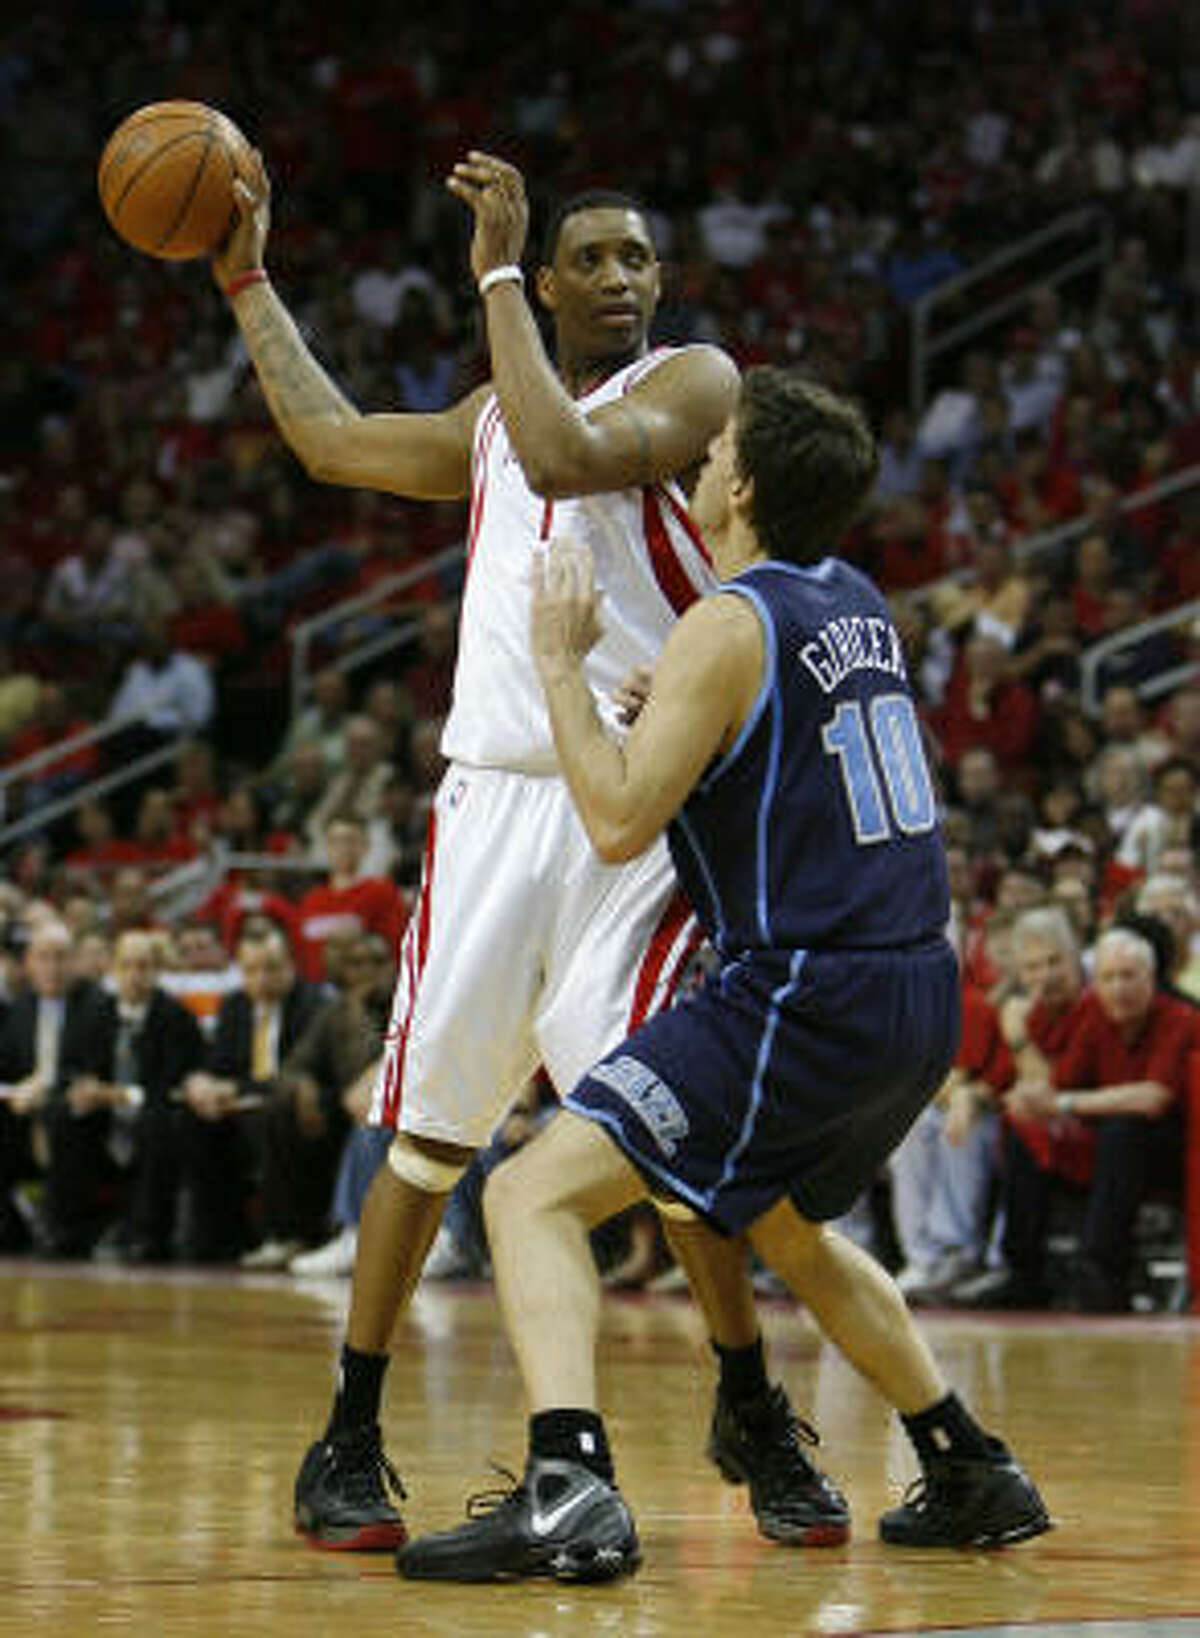 Once Tracy McGrady got going in the second half, he was just toying with the Jazz.